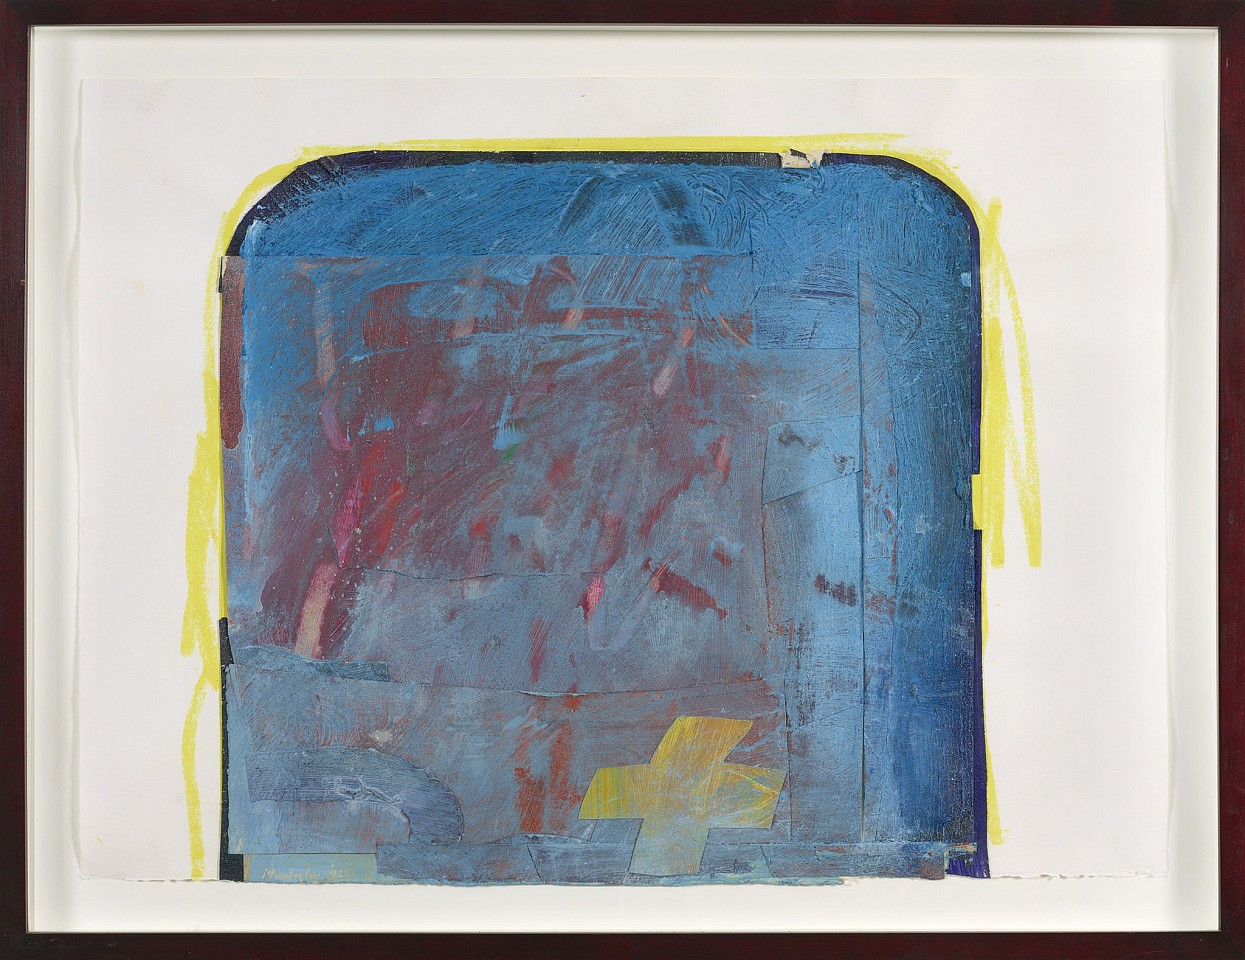 Frank Wimberley, Untitled, 1992
Acrylic, oil stick and collage on paper, 21 3/4 x 29 3/4 in. (55.2 x 75.6 cm)
WIM-00109